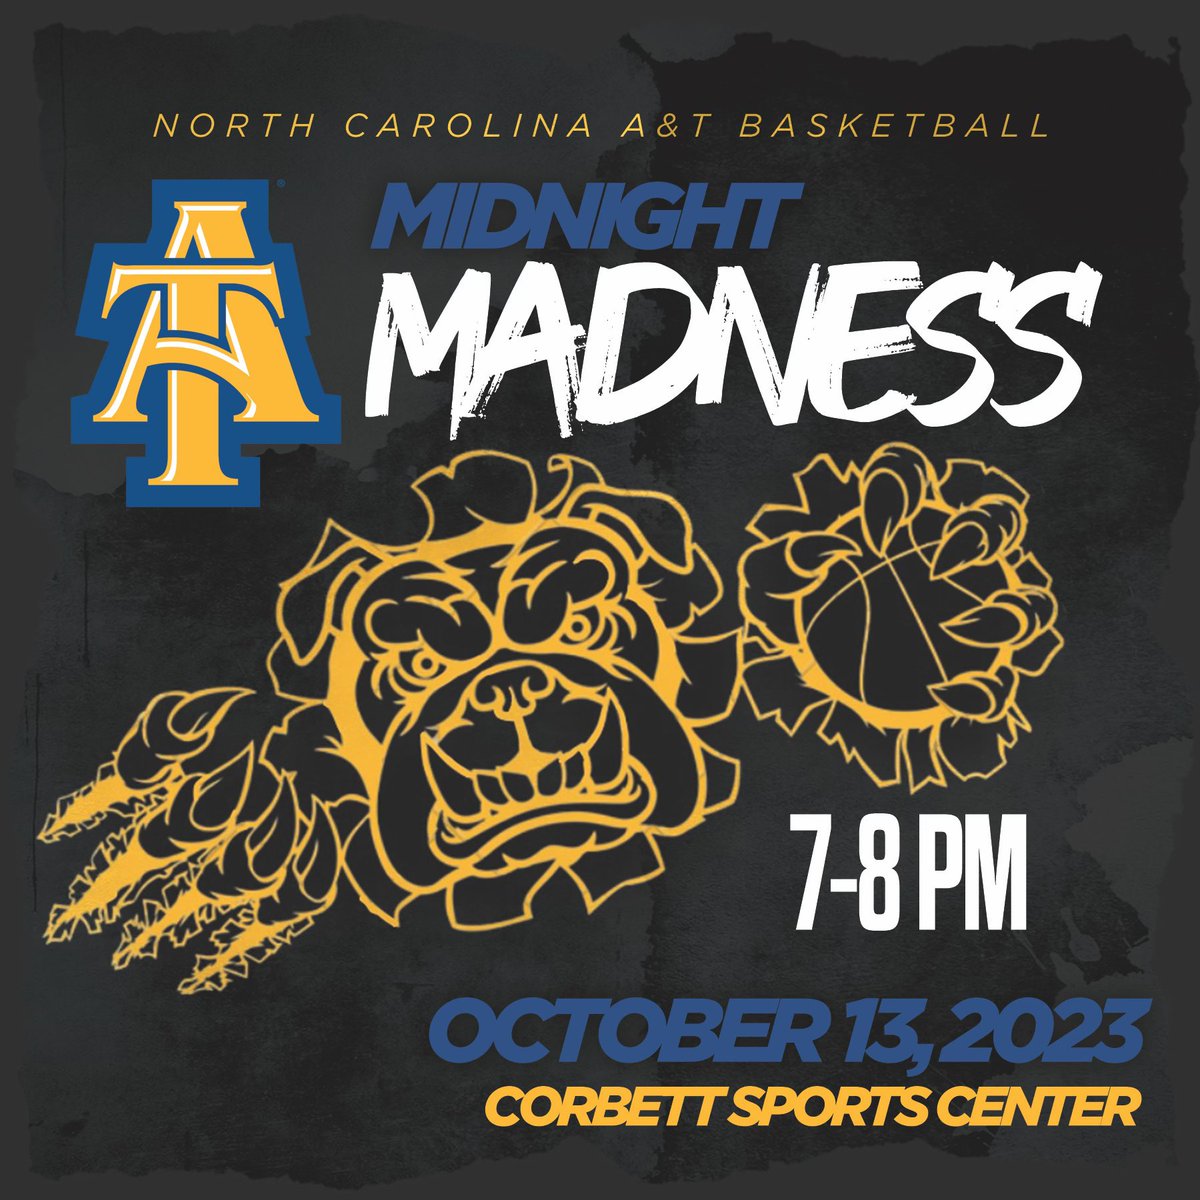 🌌 When the clock strikes midnight, legends rise. 🏀 Join us for our season opening event hosted by @CDKonthemic2x Friday, October 13 in Club Corbett! Limited edition Midnight Madness shirts will be given out! 🏀 #MidnightMadness #AggiePride #TOGETHER